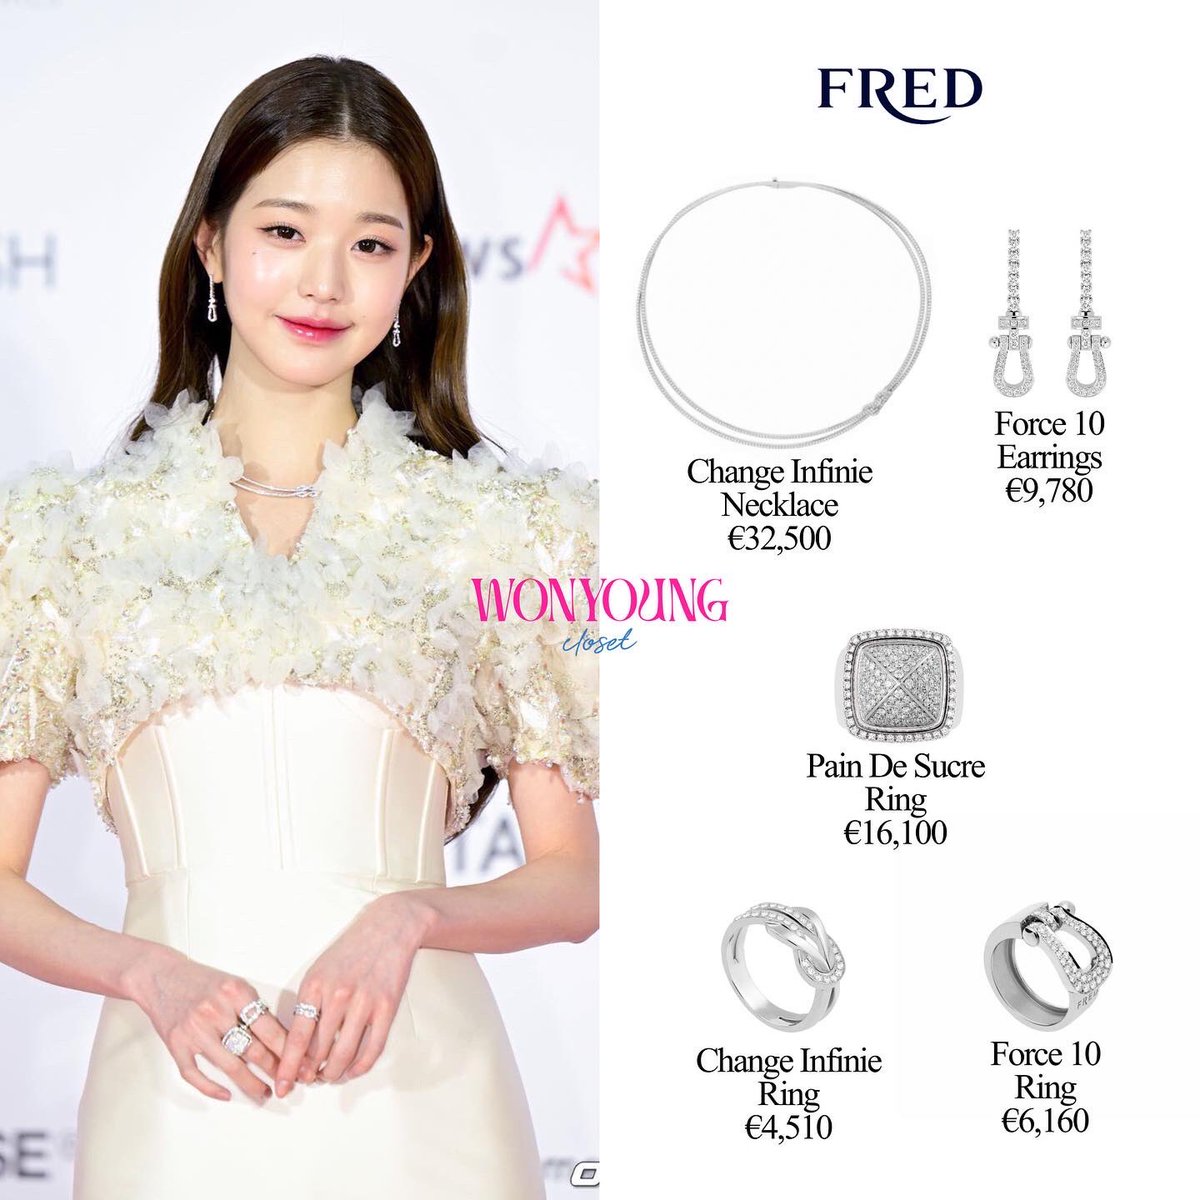 WONYOUNG'S STYLE🤍 on X: 221213 Wonyoung At AAA 2022 Red Carpet ————— She  is wearing Pinkong, Maison De Sofia Grace and Fred Jewelry ————— Huge  thanks to @/summarff (on ig) for the